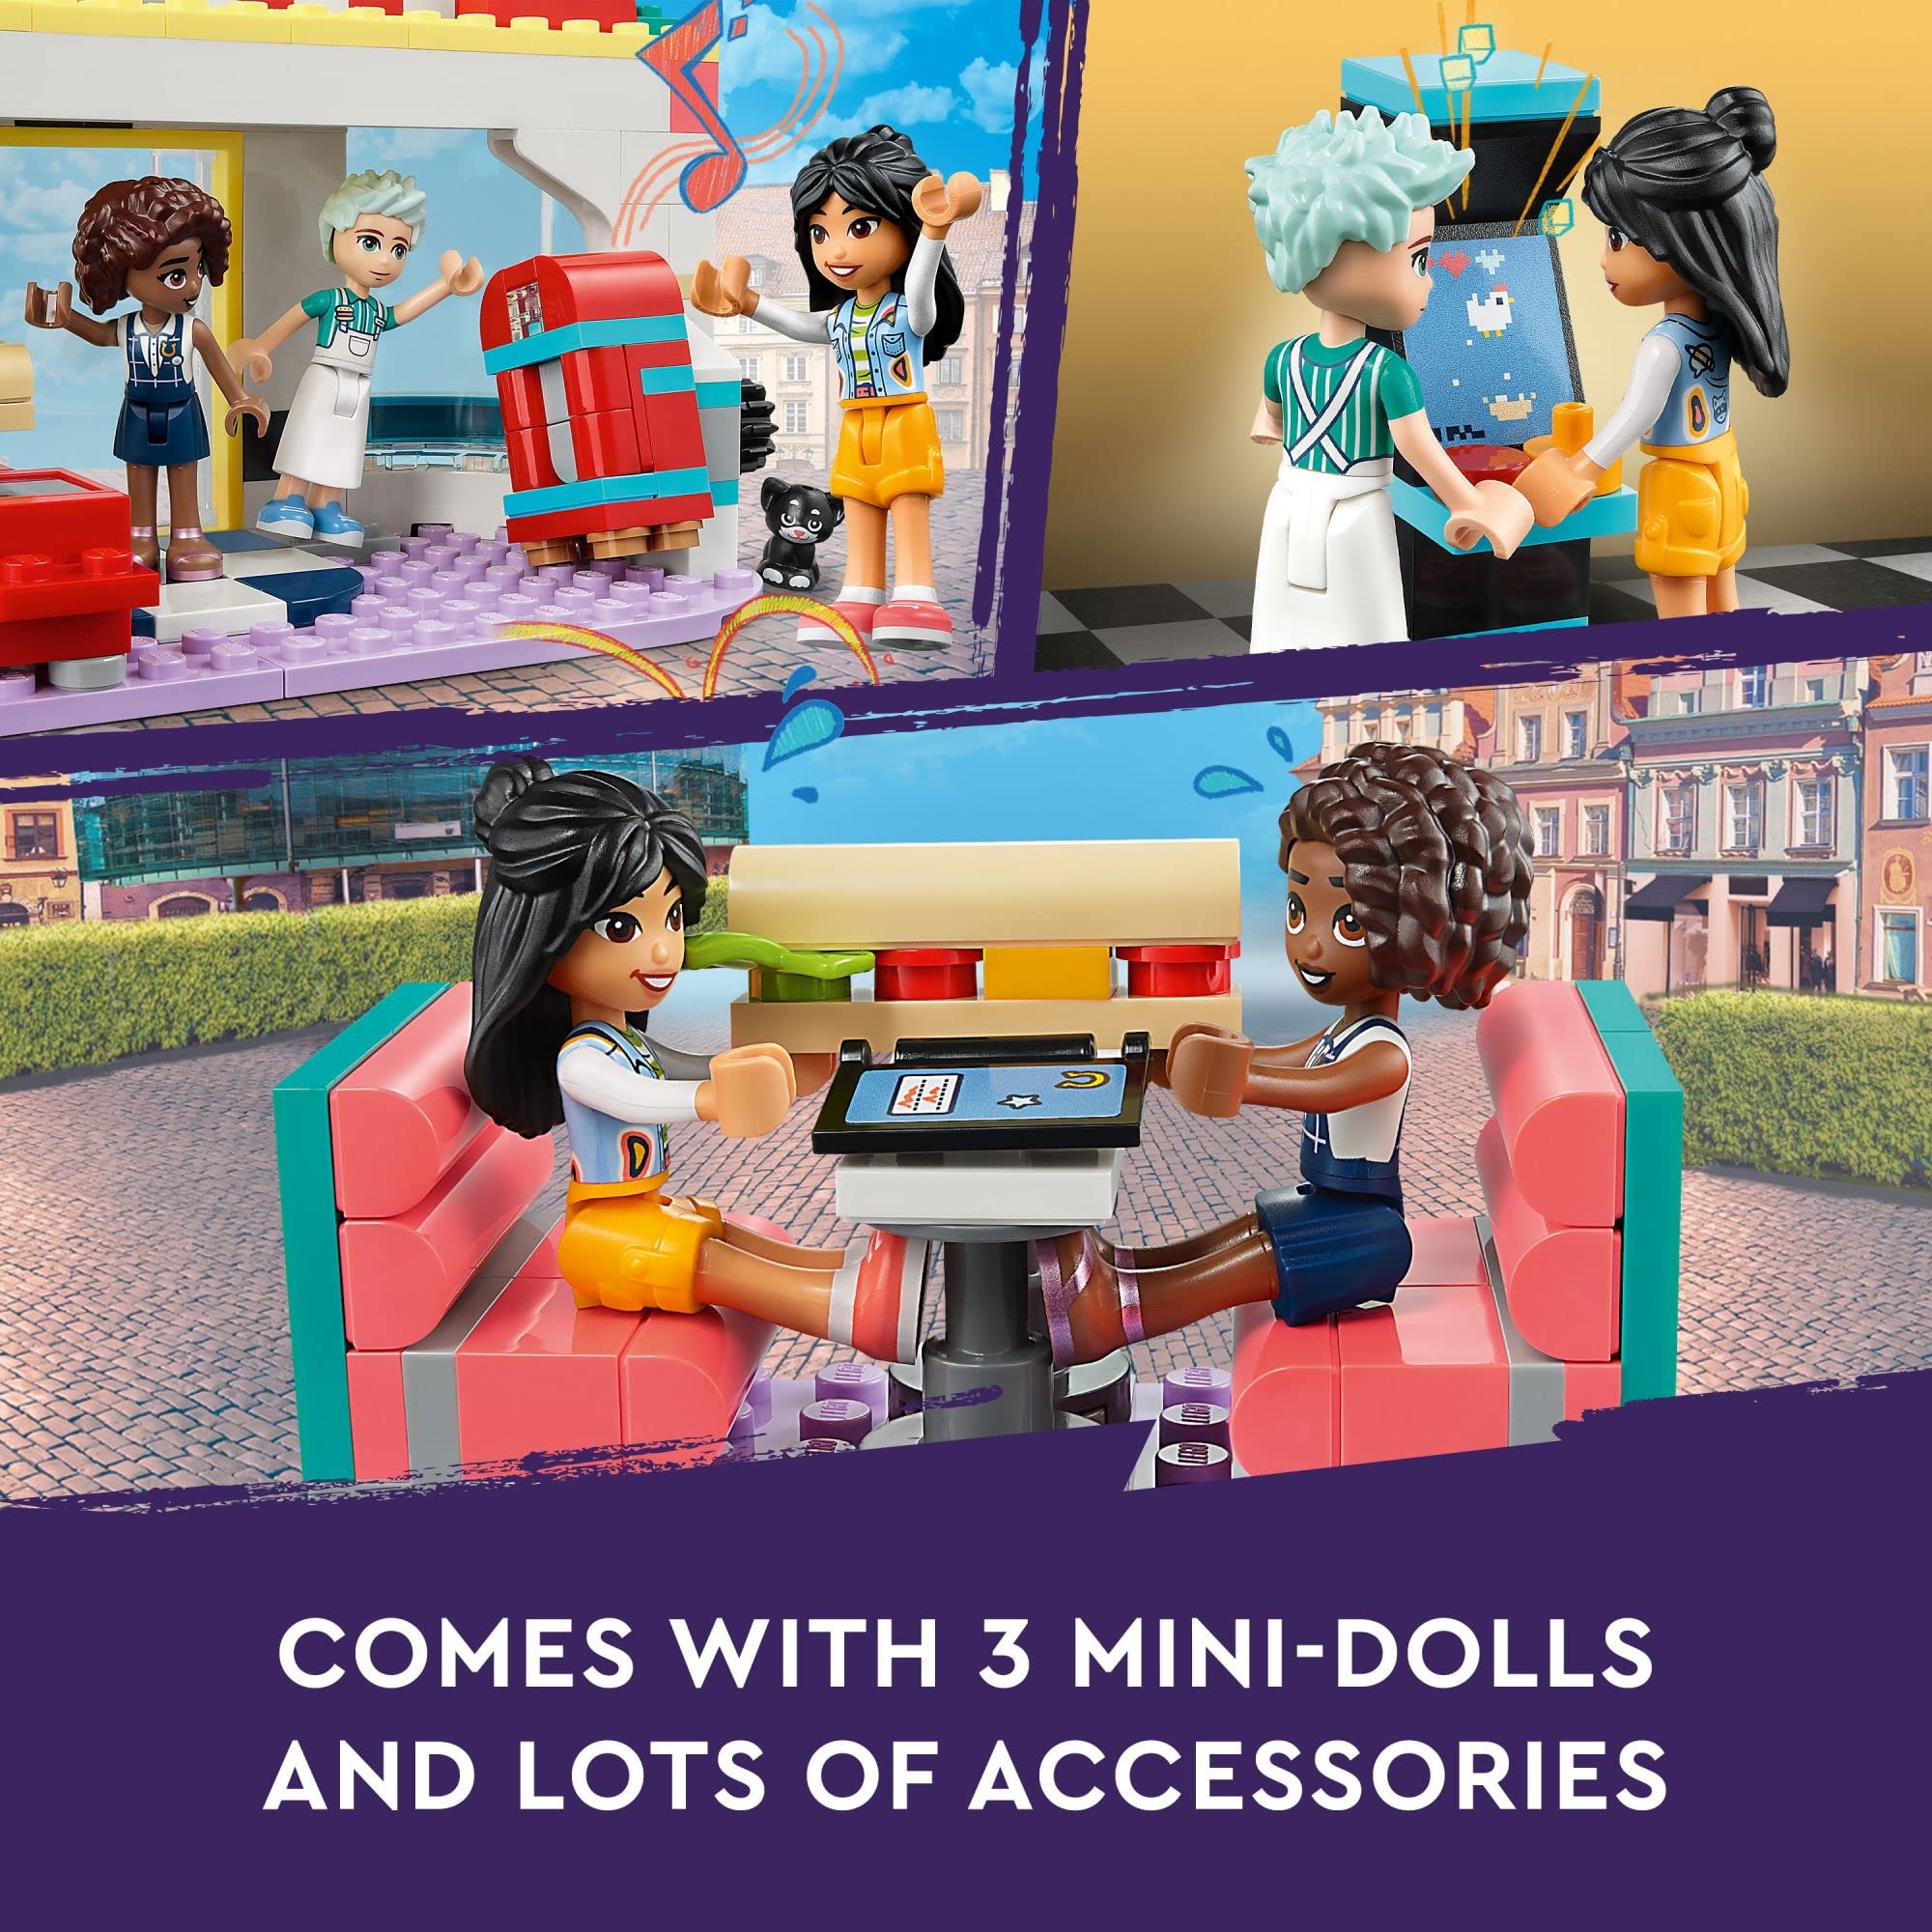 LEGO Friends Heartlake Downtown Diner 41728 Building Toy - Restaurant Pretend Playset with Food, Includes Mini-Dolls Liann, Aliya, and Charli, Birthday Gift Toy Set for Boys and Girls Ages 6+